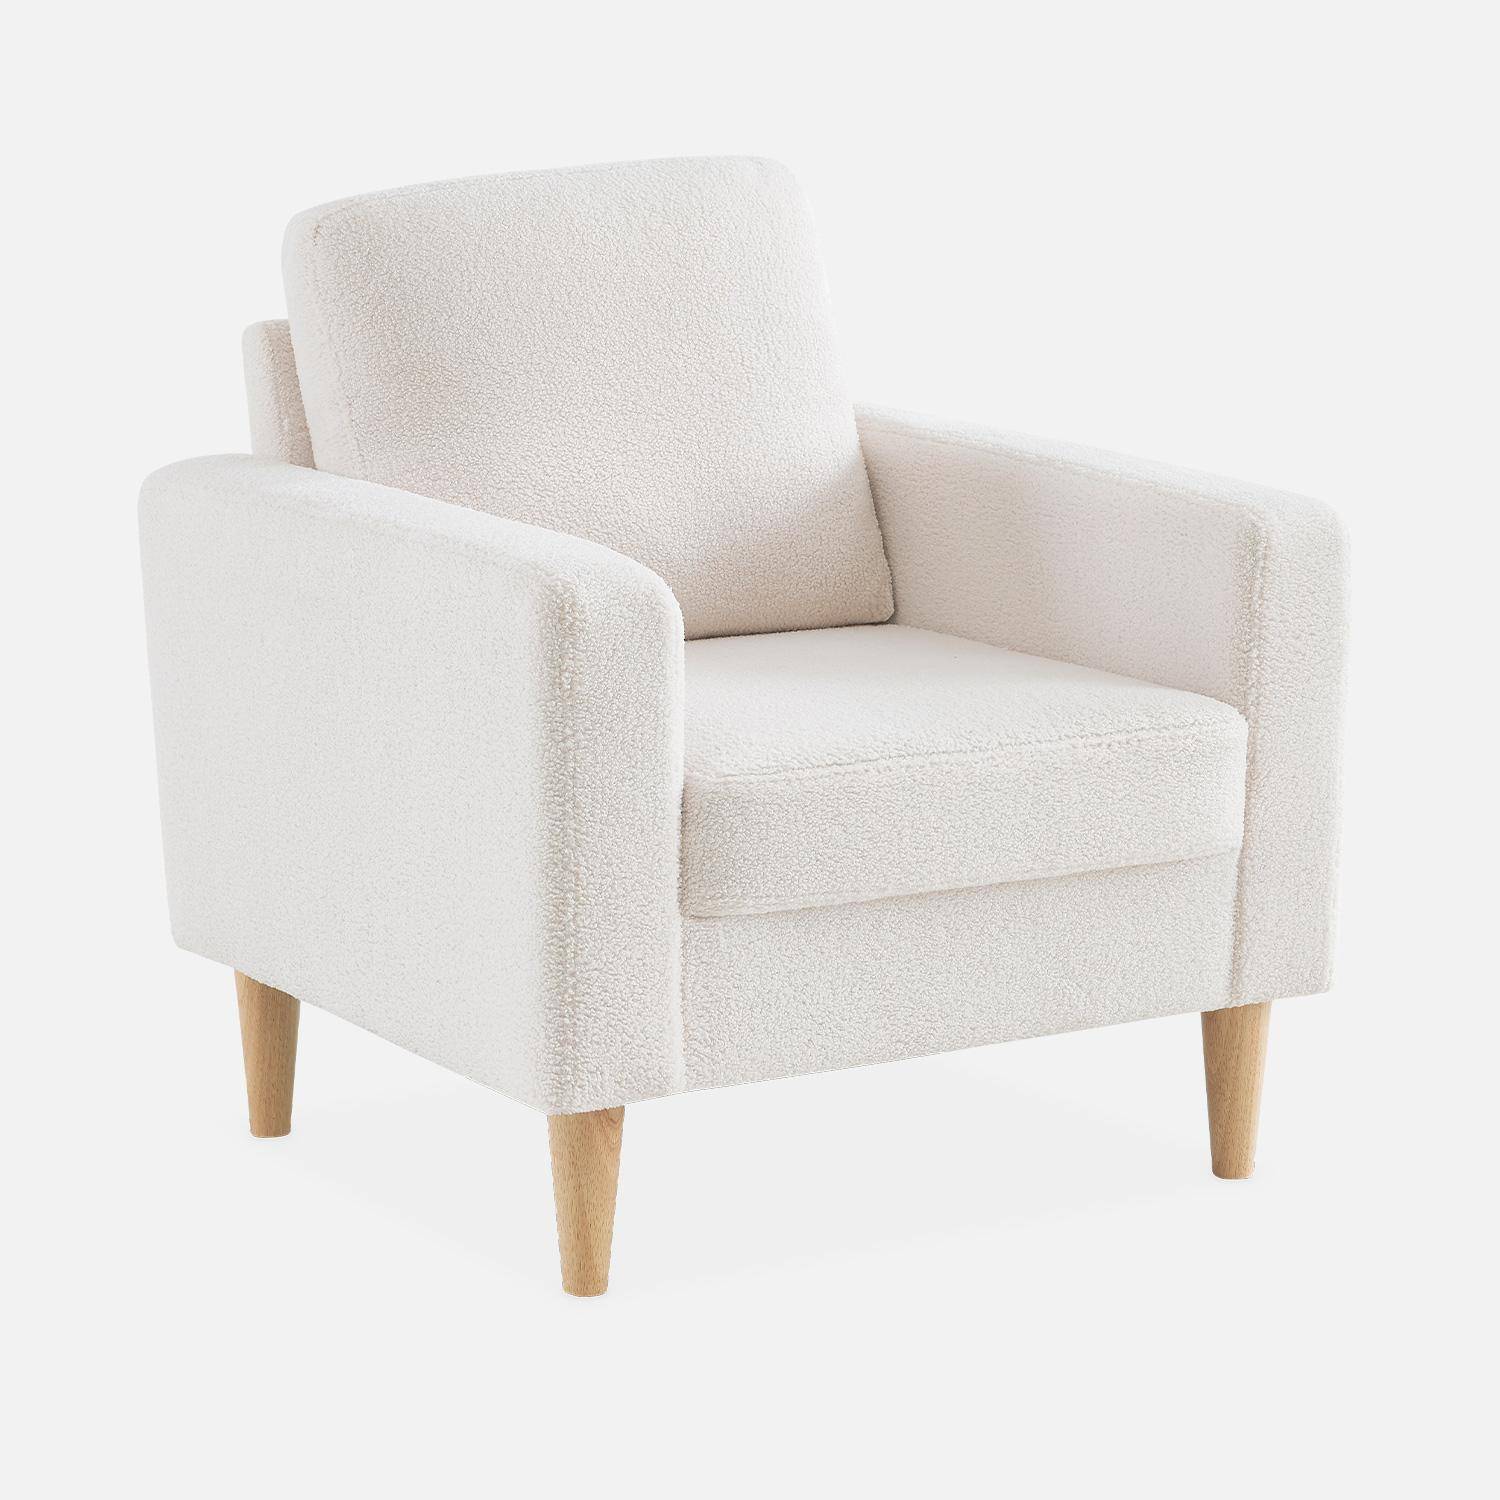 Scandi-style armchair with wooden legs - Bjorn - white boucle,sweeek,Photo3